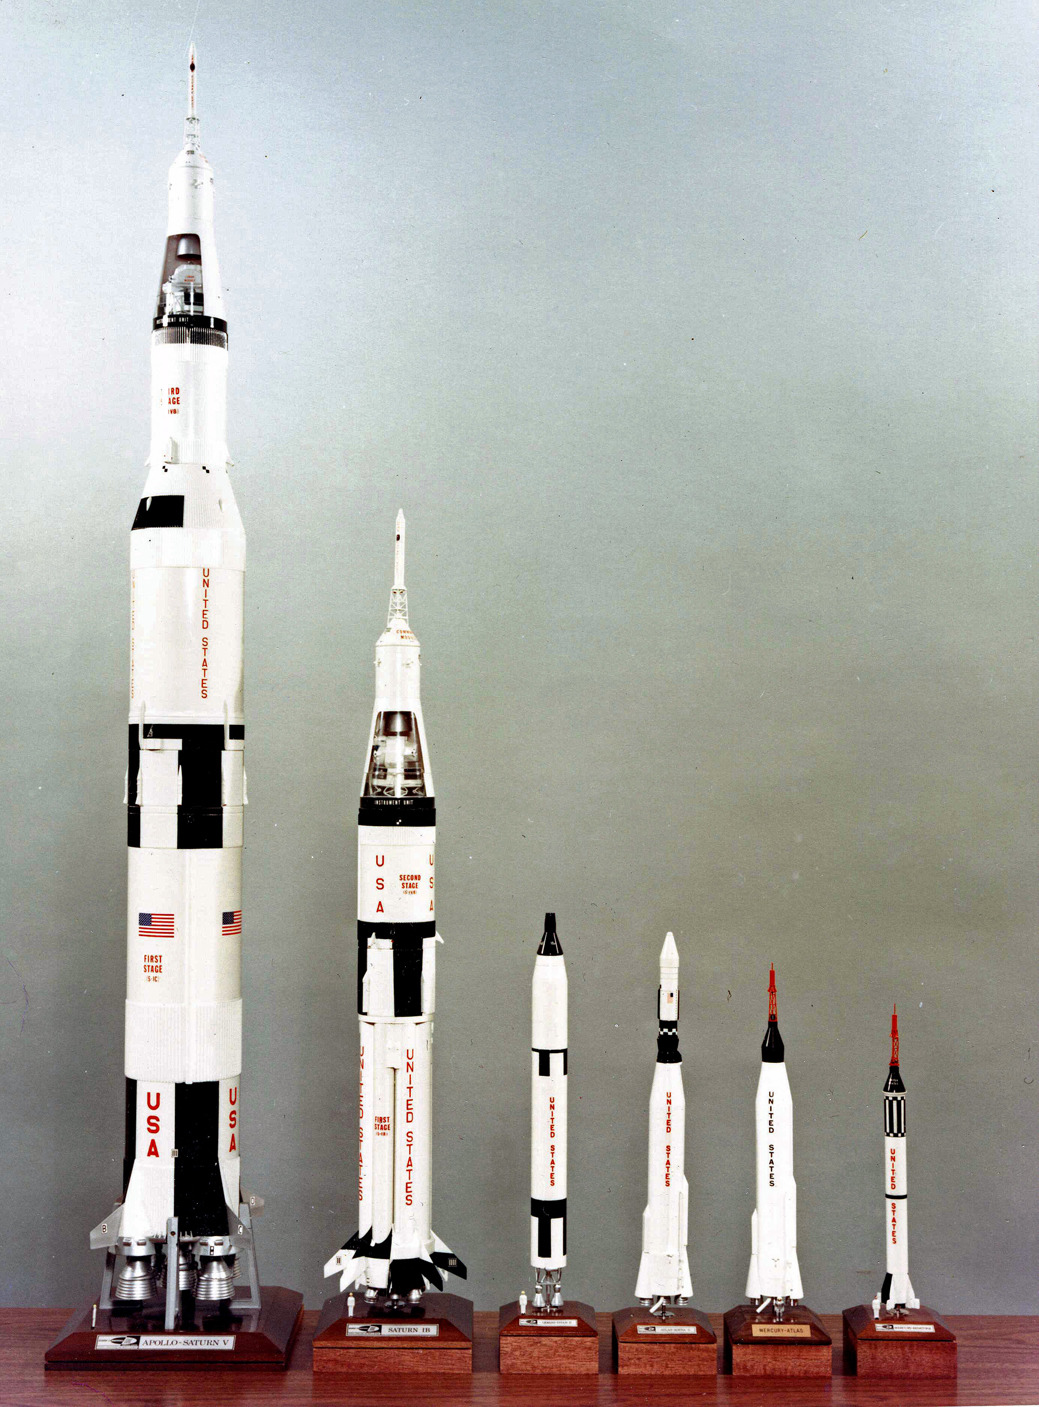 thewoodlanders: “commandmodulepilot: “ NASA’s manned Space Program Launch Vehicles: Redstone to Saturn V. ” I still can’t believe that anyone volunteered to sit on top of these things. Things which had been built by the lowest bidder no less. ;-) ”